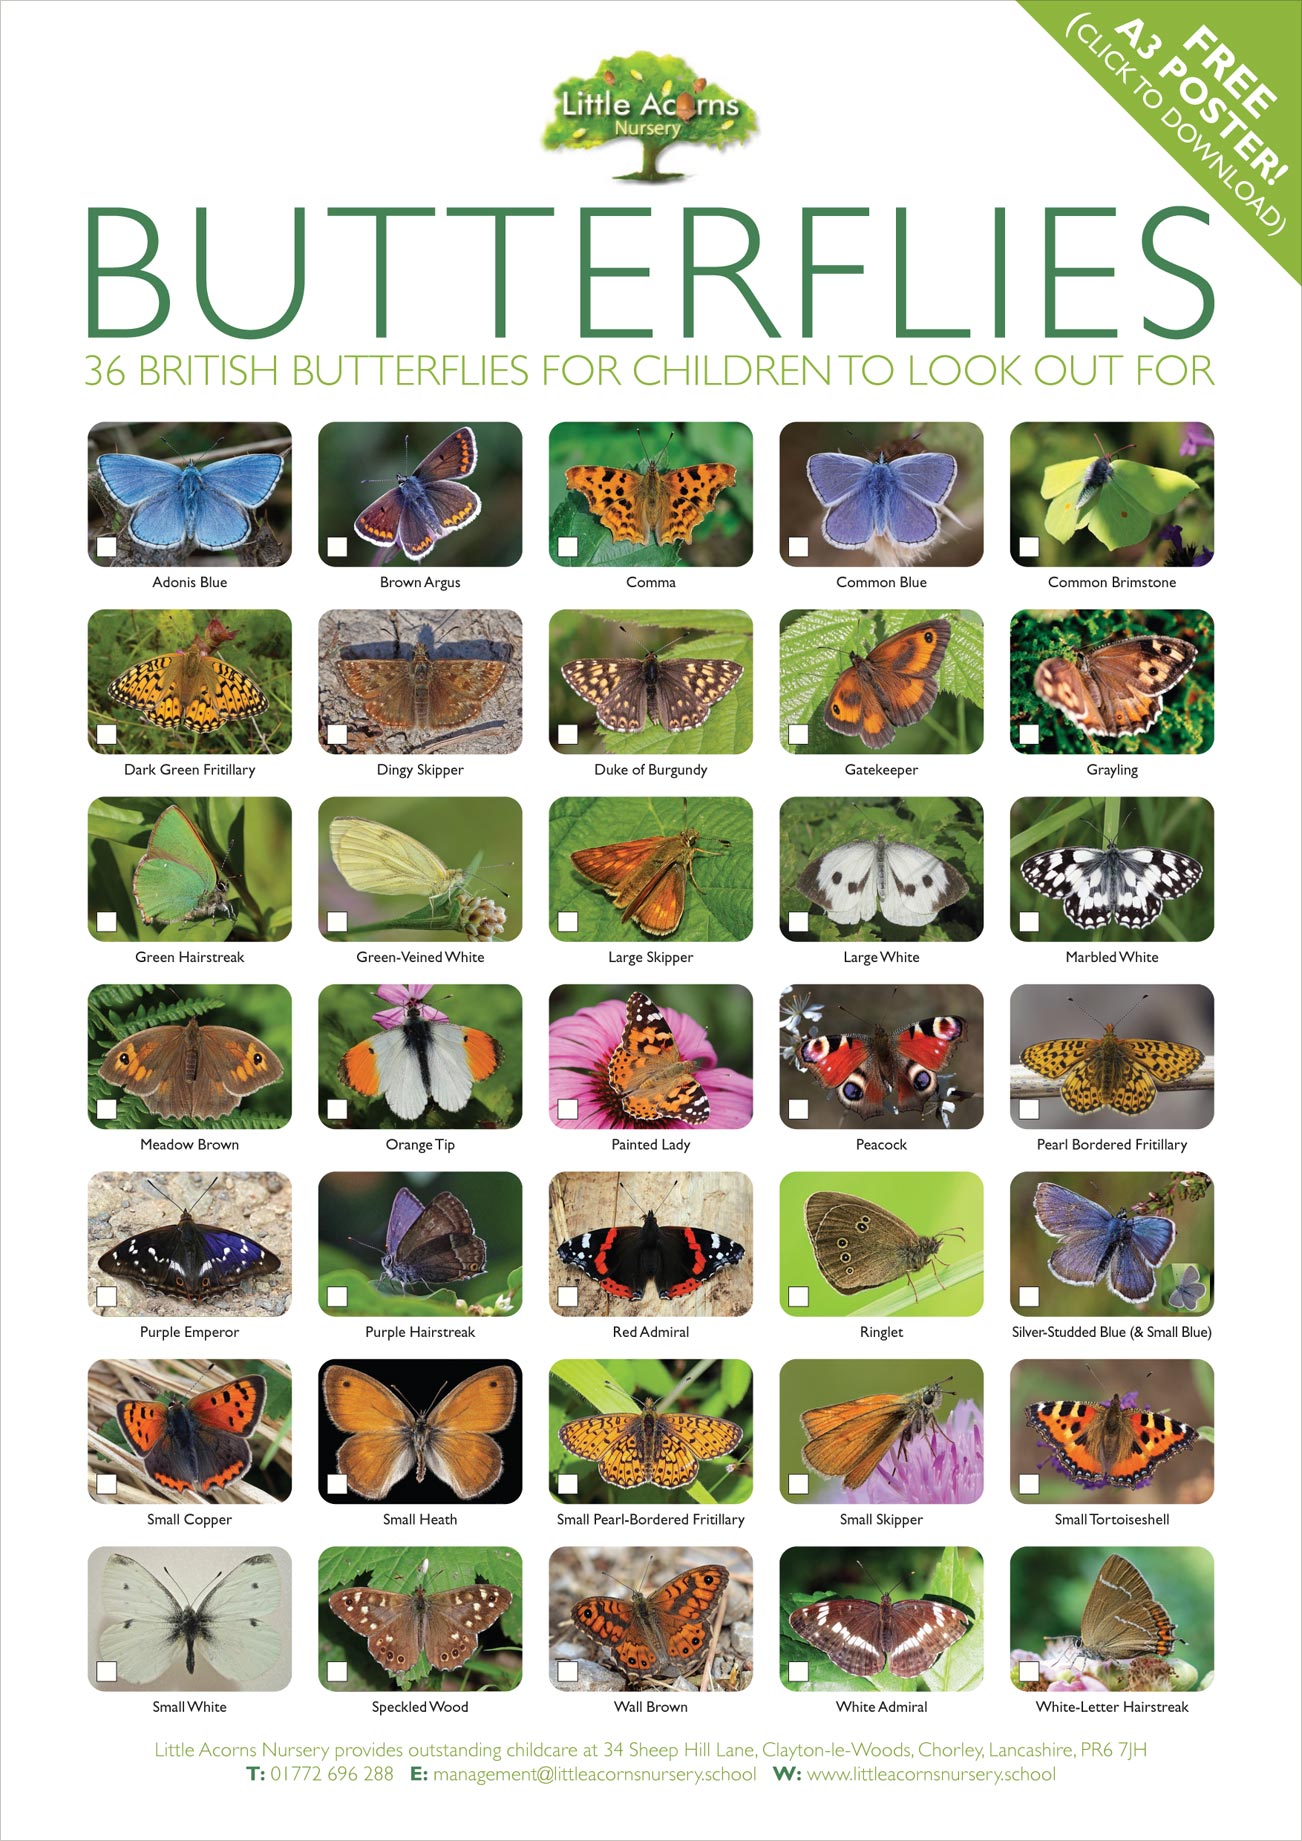 Download your free British butterfly identification poster (click to download or view).